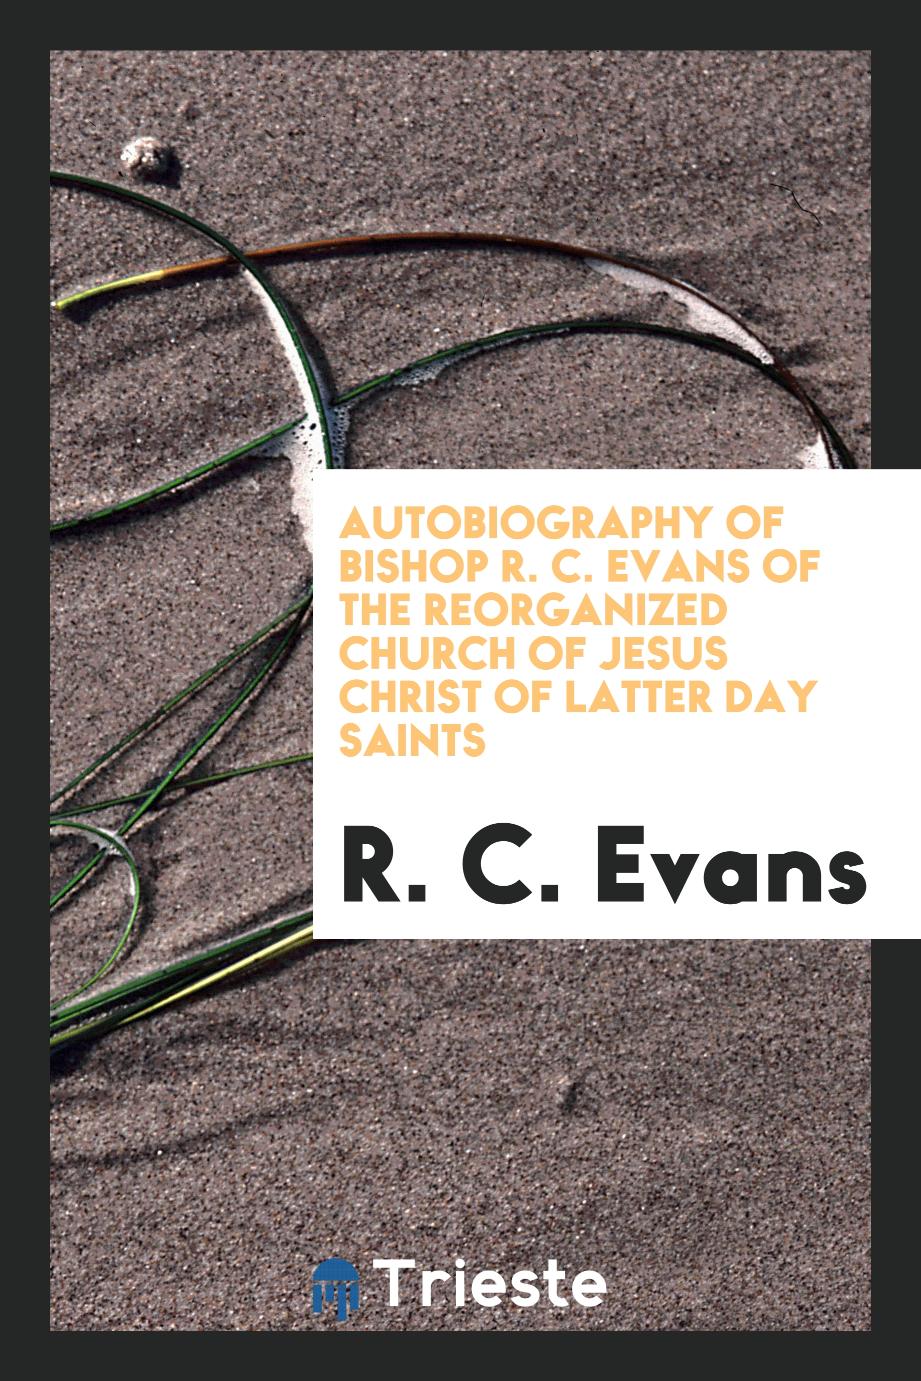 Autobiography of Bishop R. C. Evans of the Reorganized Church of Jesus Christ of Latter Day Saints